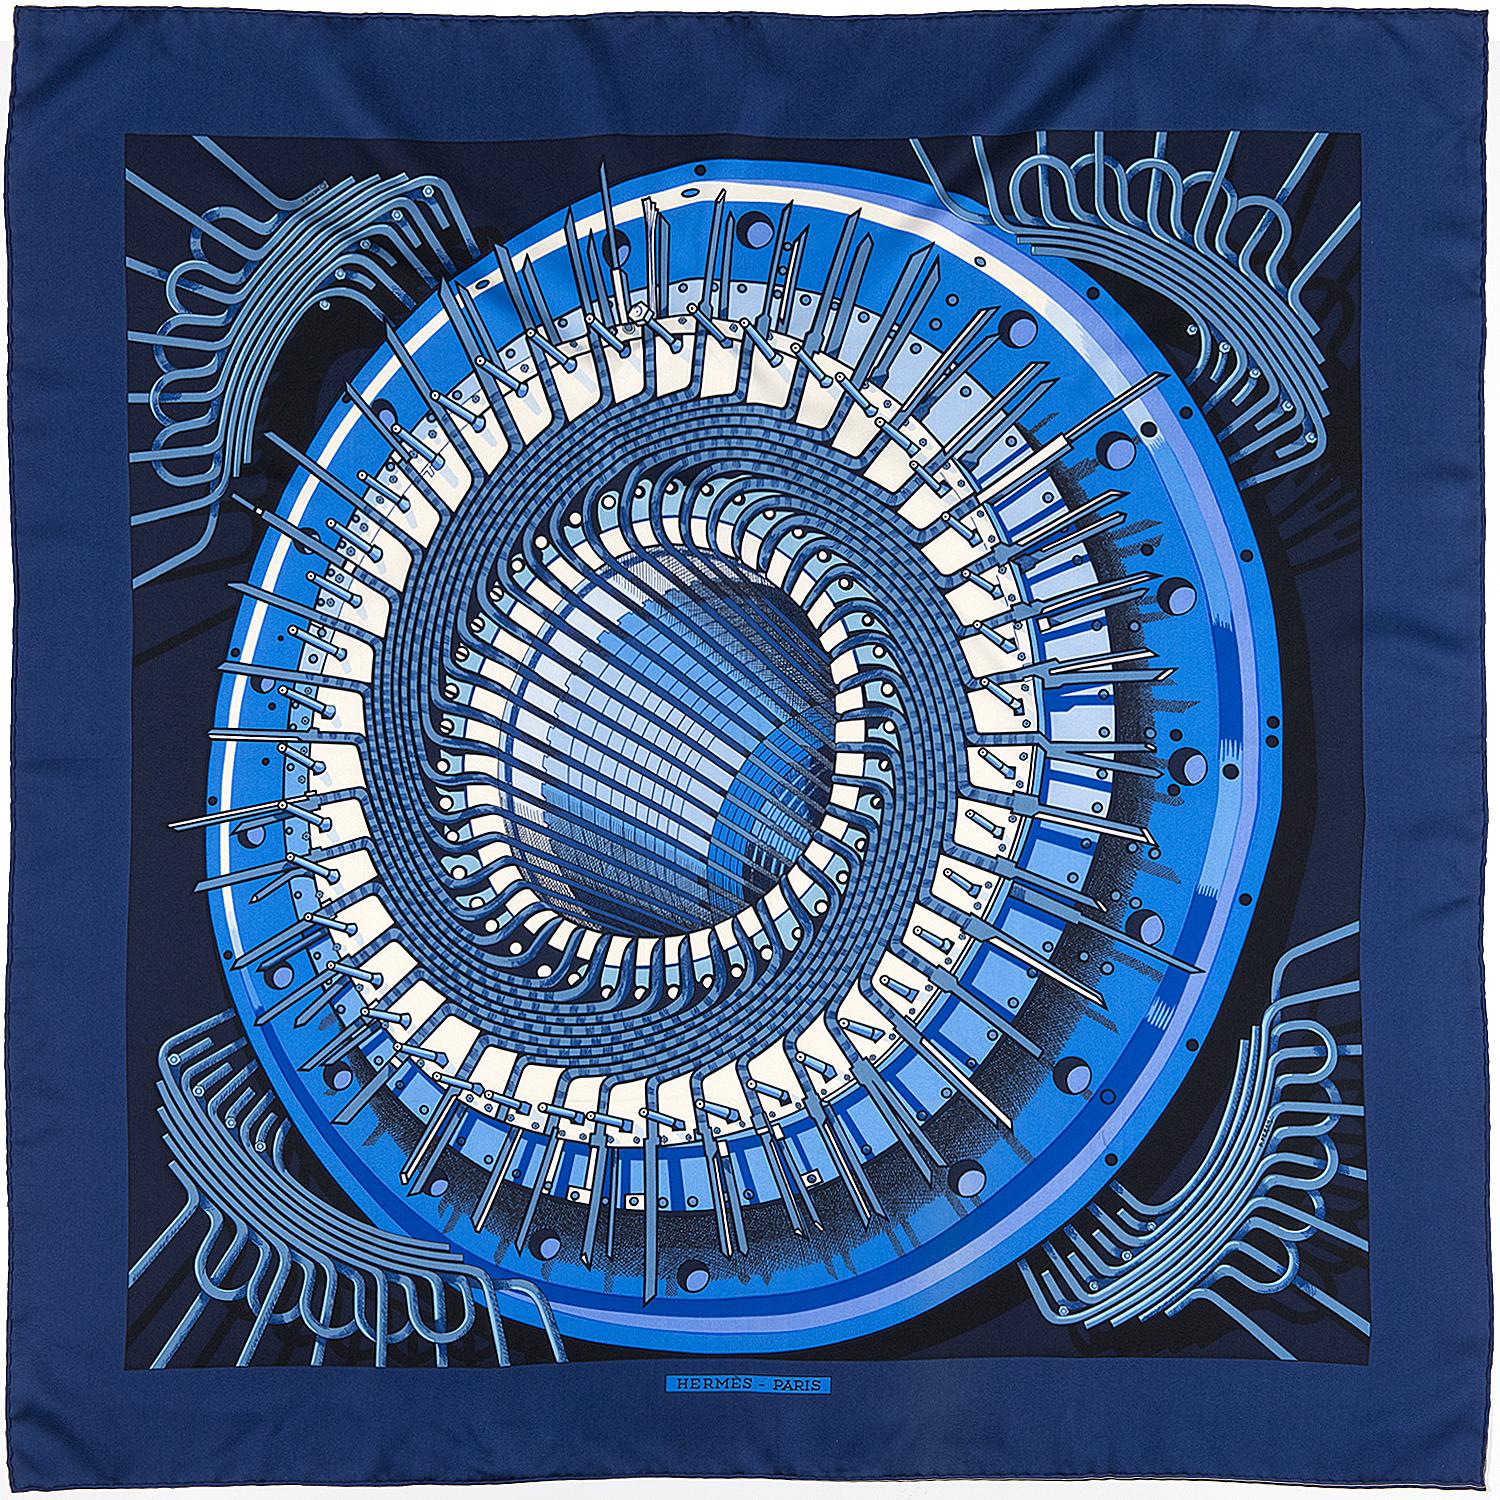 A Stunning Hermes Silk Scarf in Pristine, As-New condition. 'Alternateur' by Pierre Peron was first designed in 1971 and re-issued in 2012. This beautiful design finished in rich blue hues, is from 2012 and is a real statement piece.